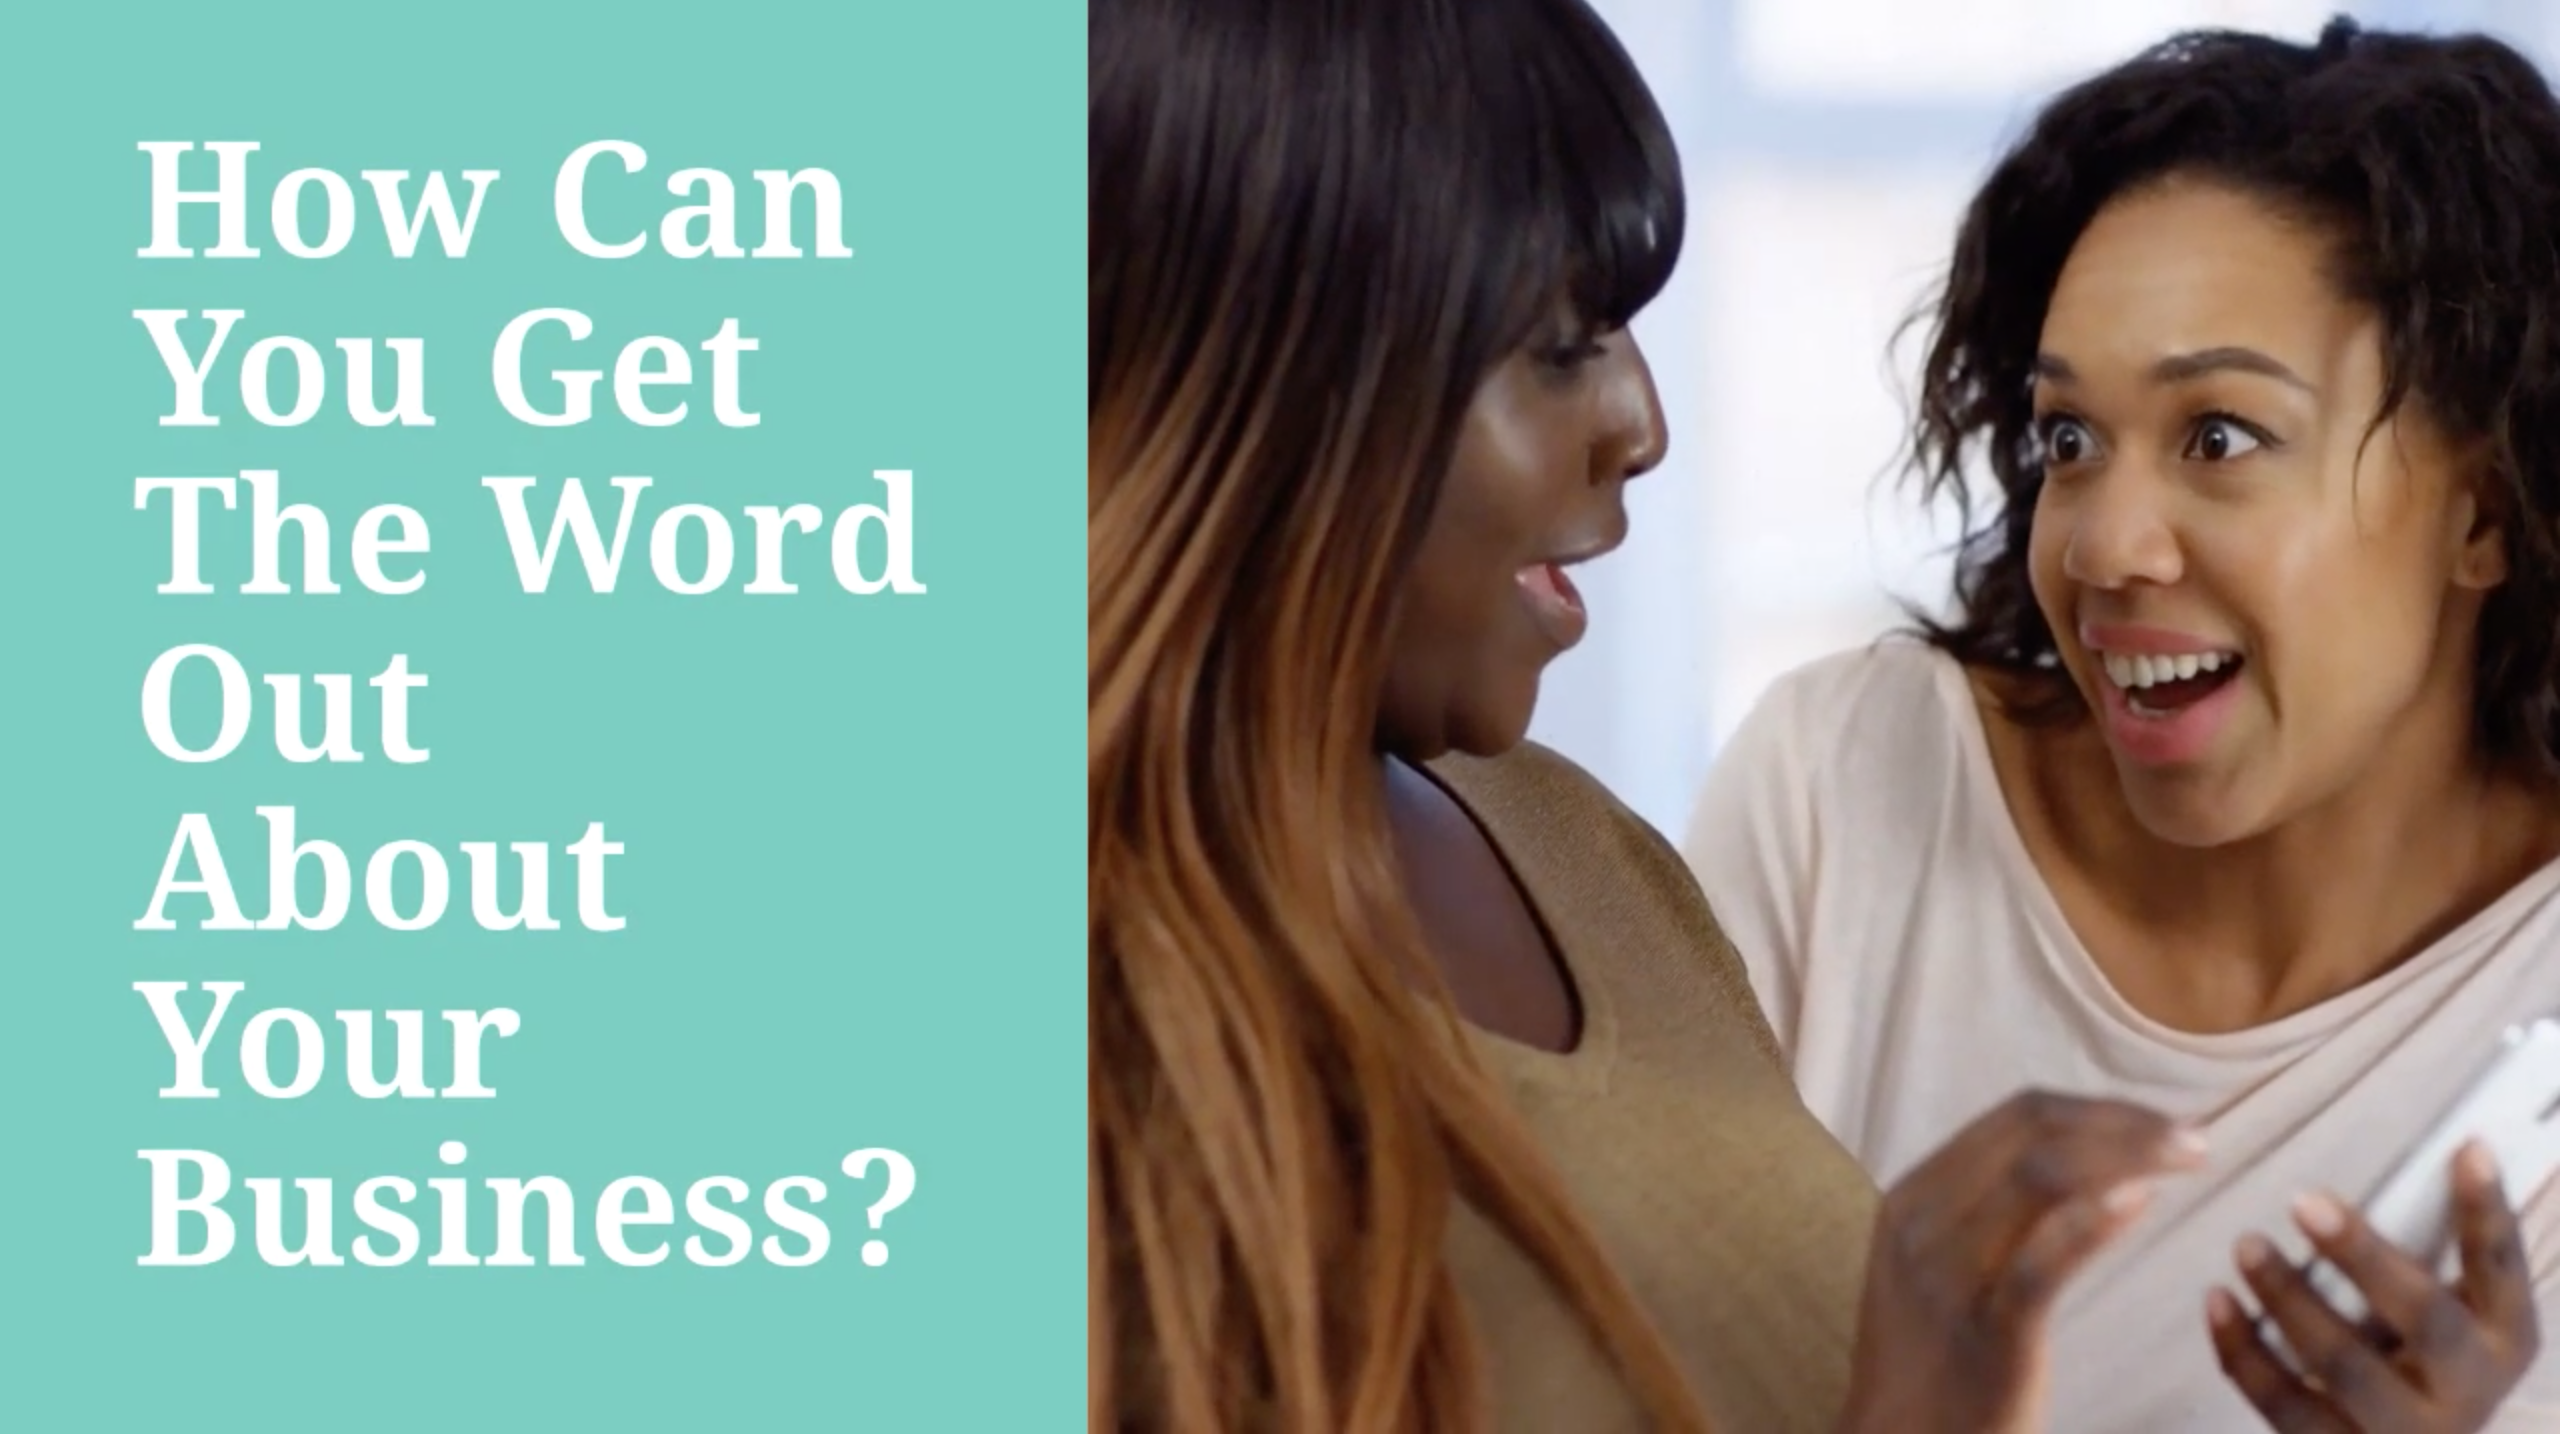 Video: How To Get The Word Out About Your Business With Custom Marketing!